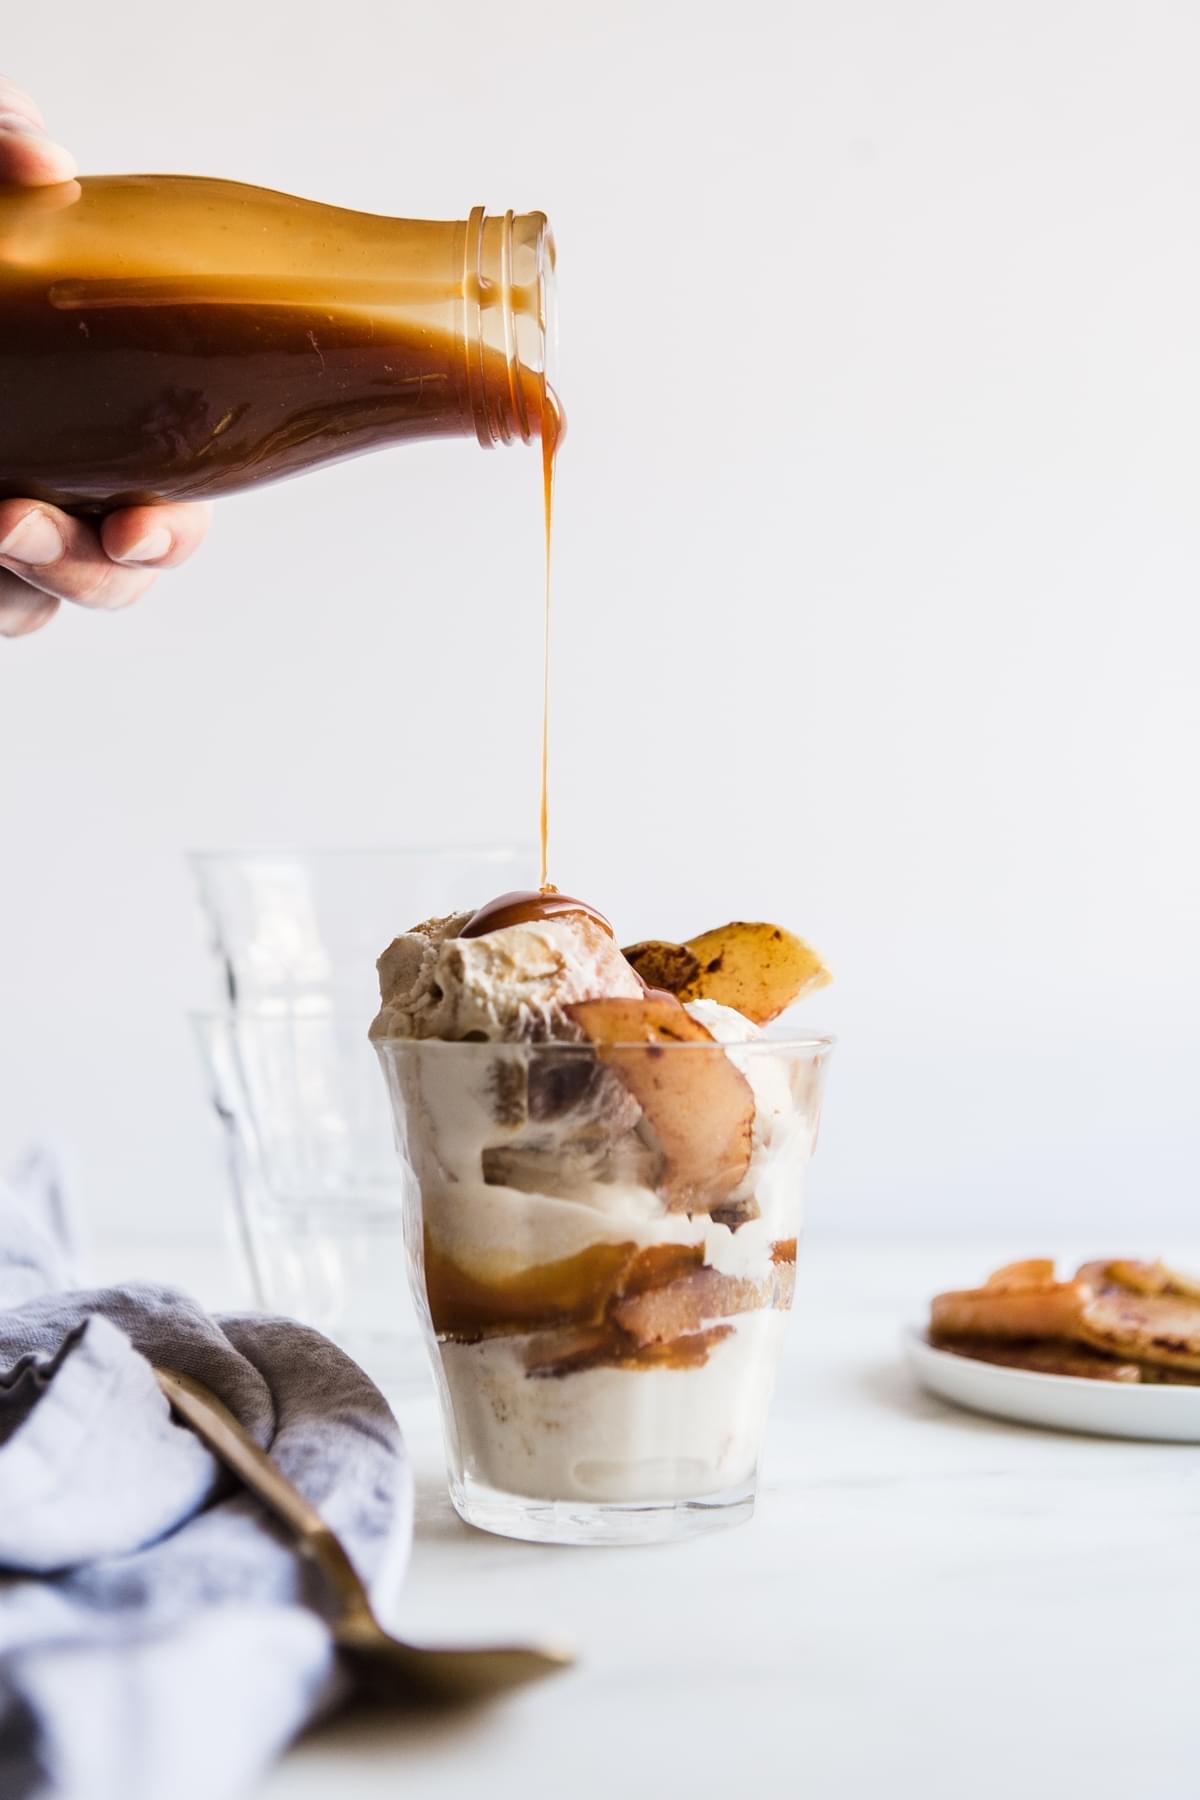 homemade salted caramel sauce being poured over an cinnamon roasted apple sundae in a cup